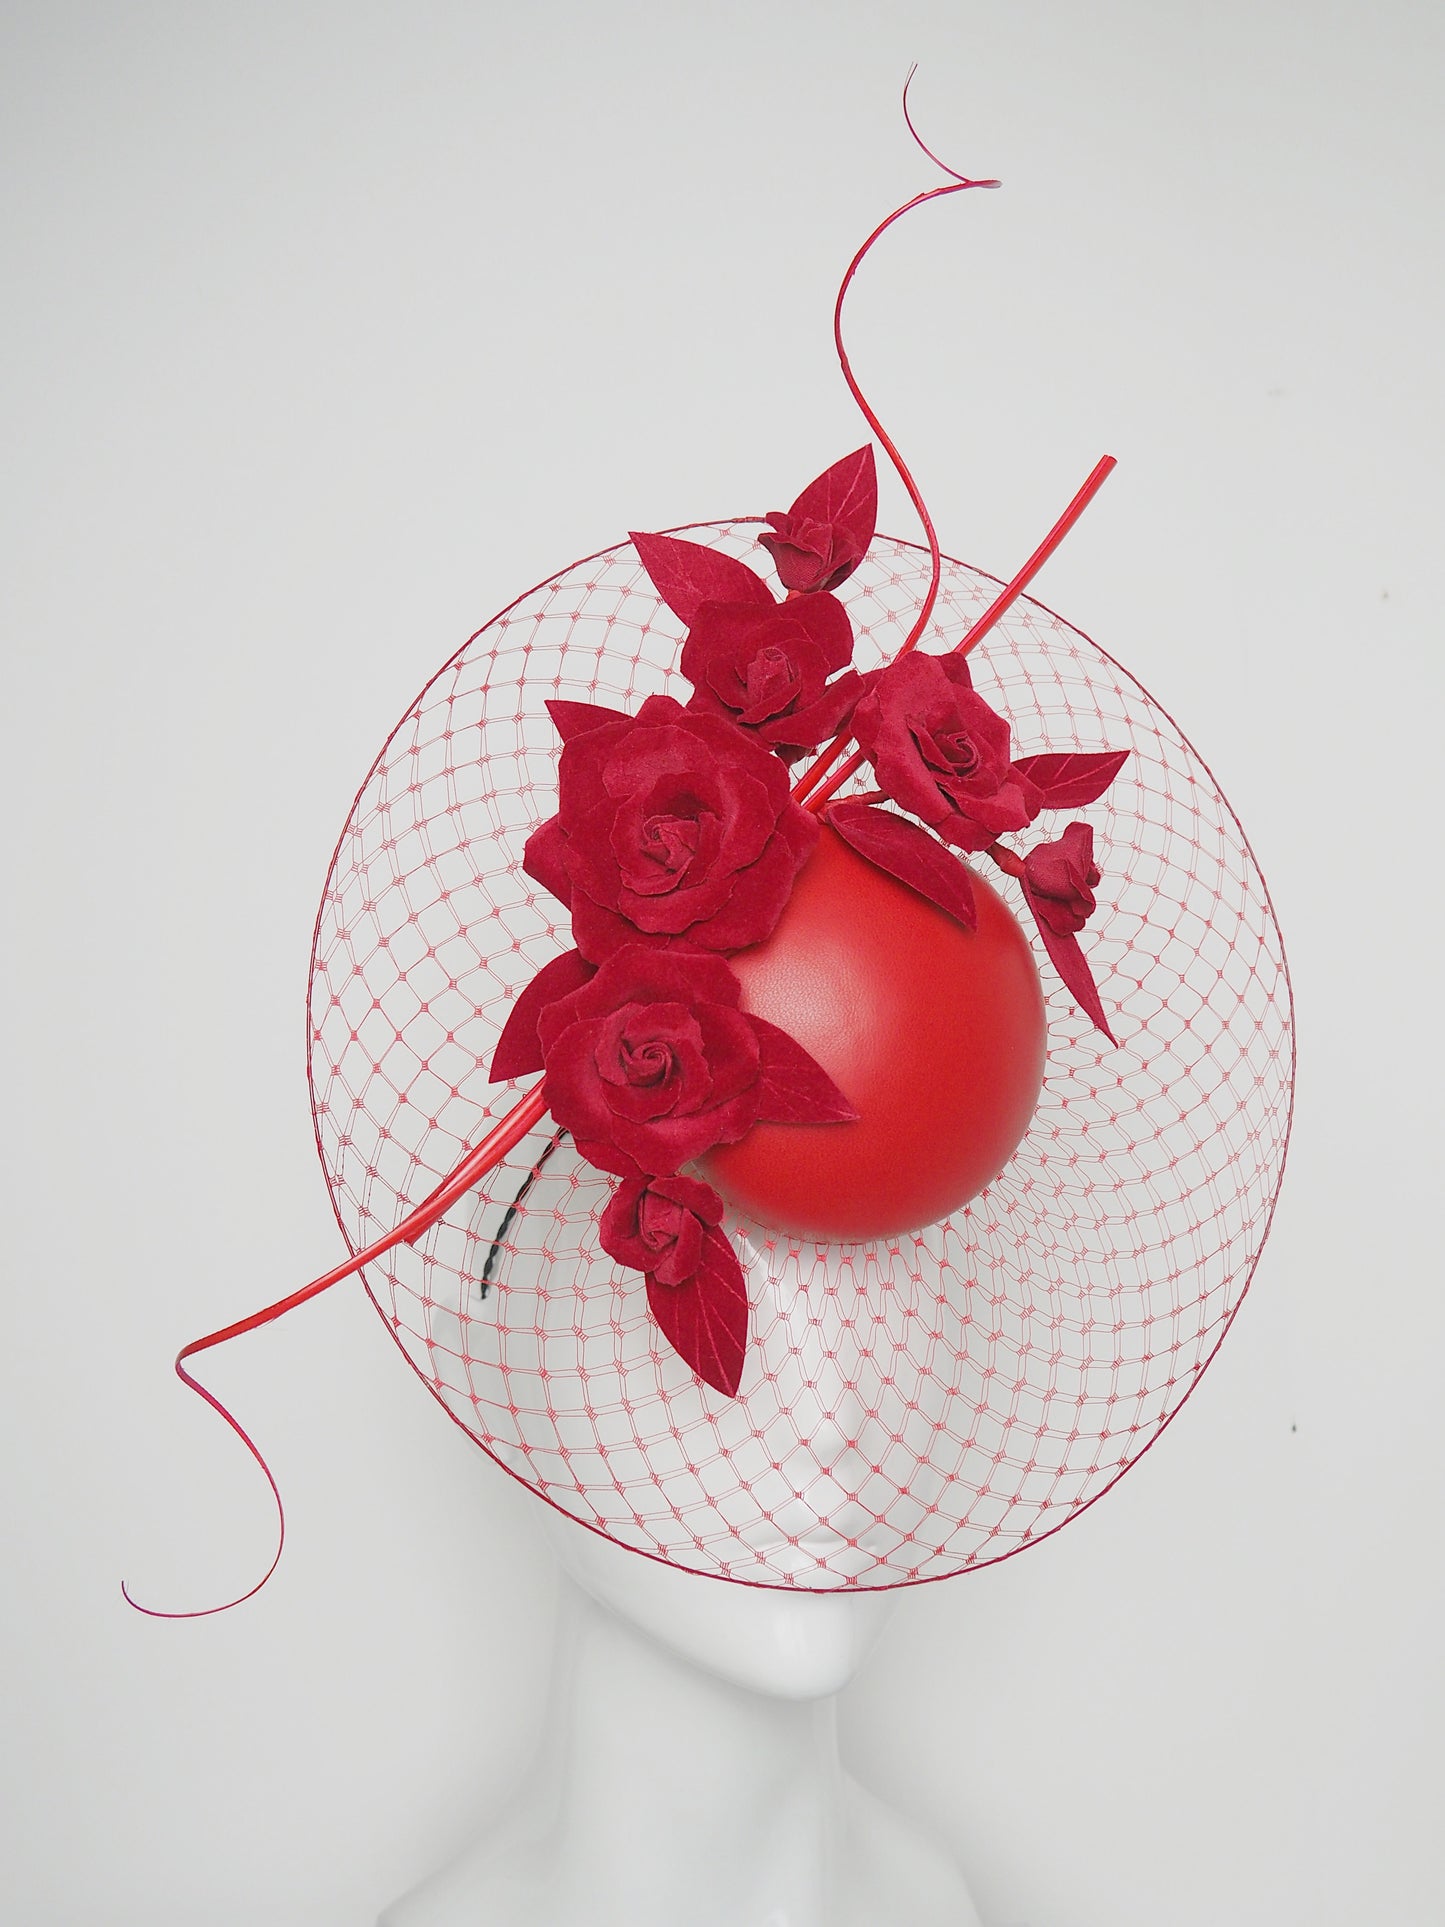 Roses are red - Scarlet red leather Percher with velvet roses and veil